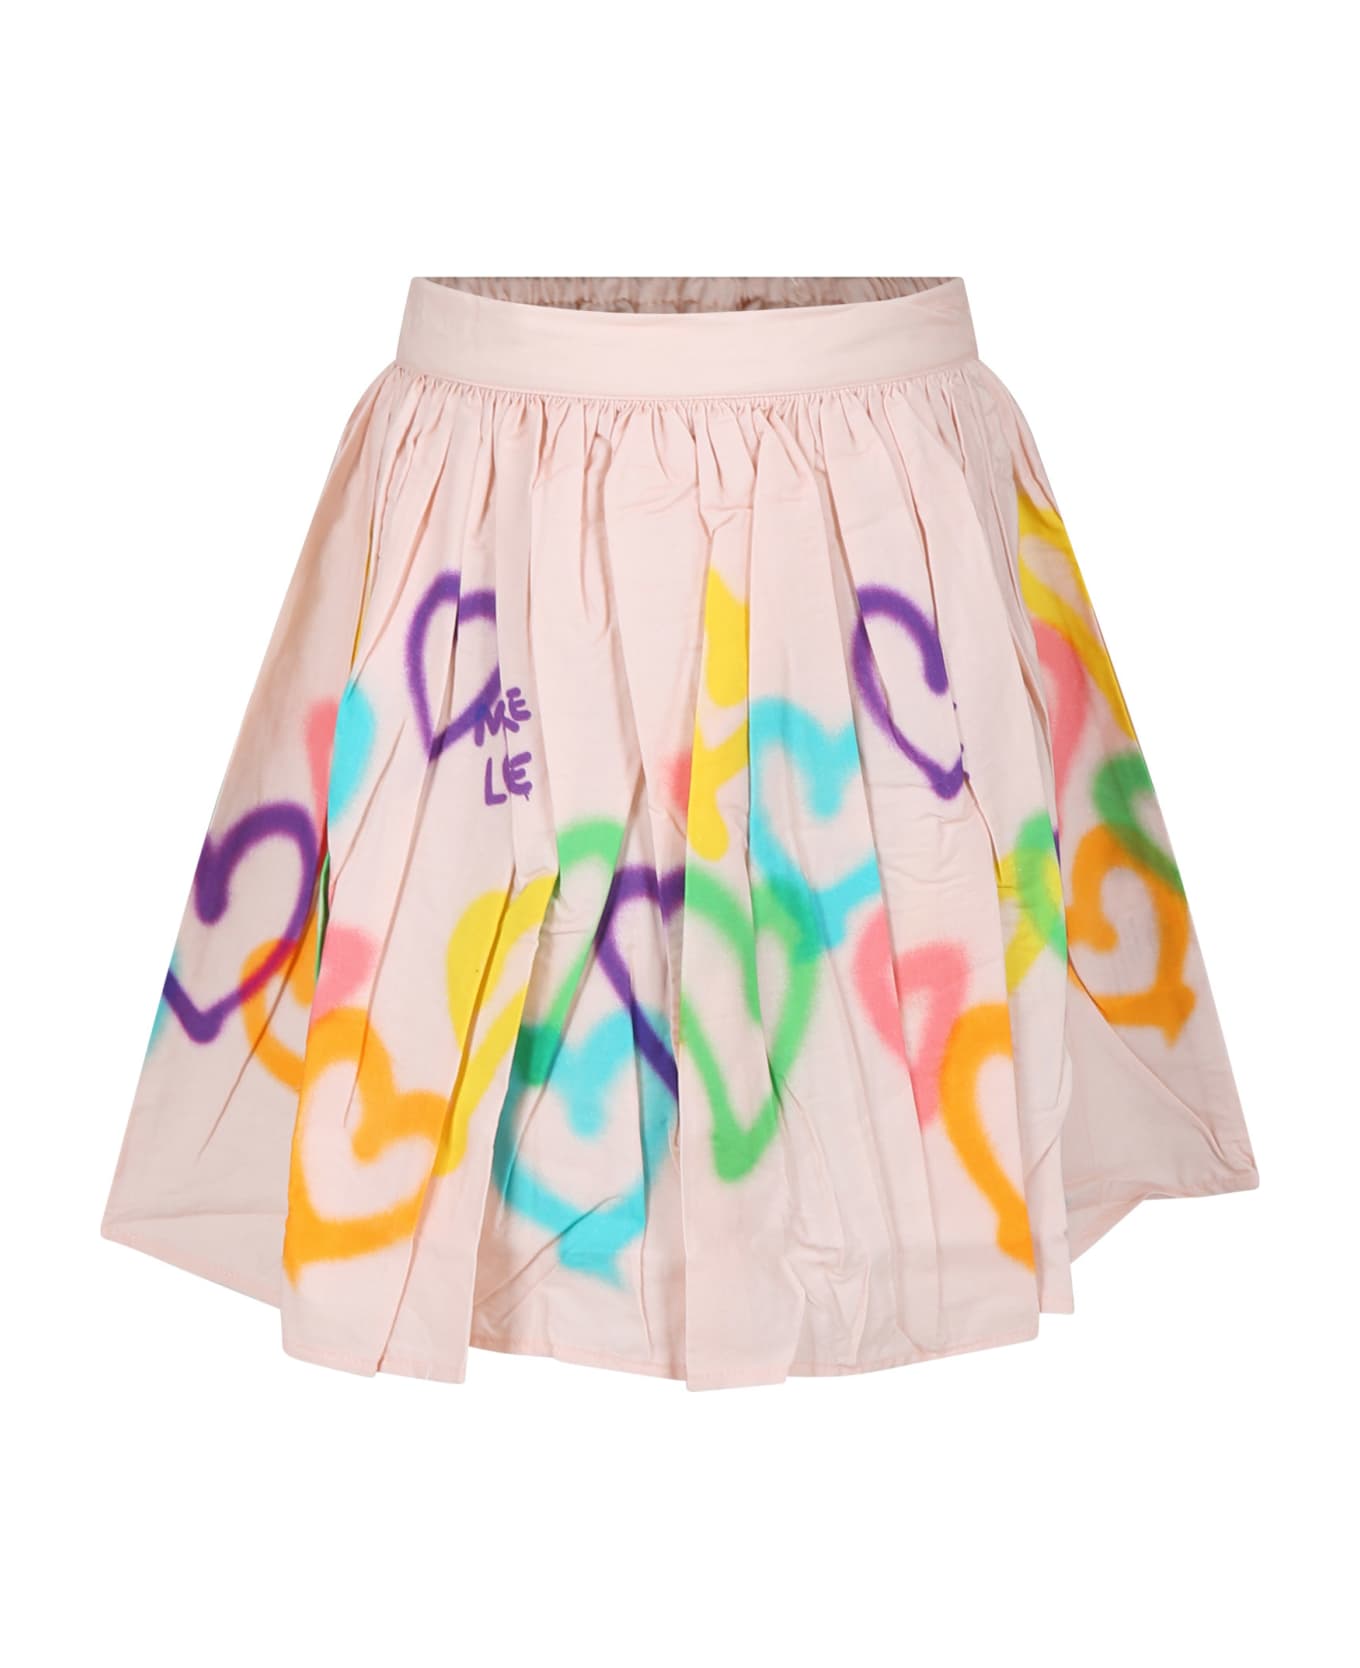 Molo Pink Skirt For Girl With Hearts Print - Pink